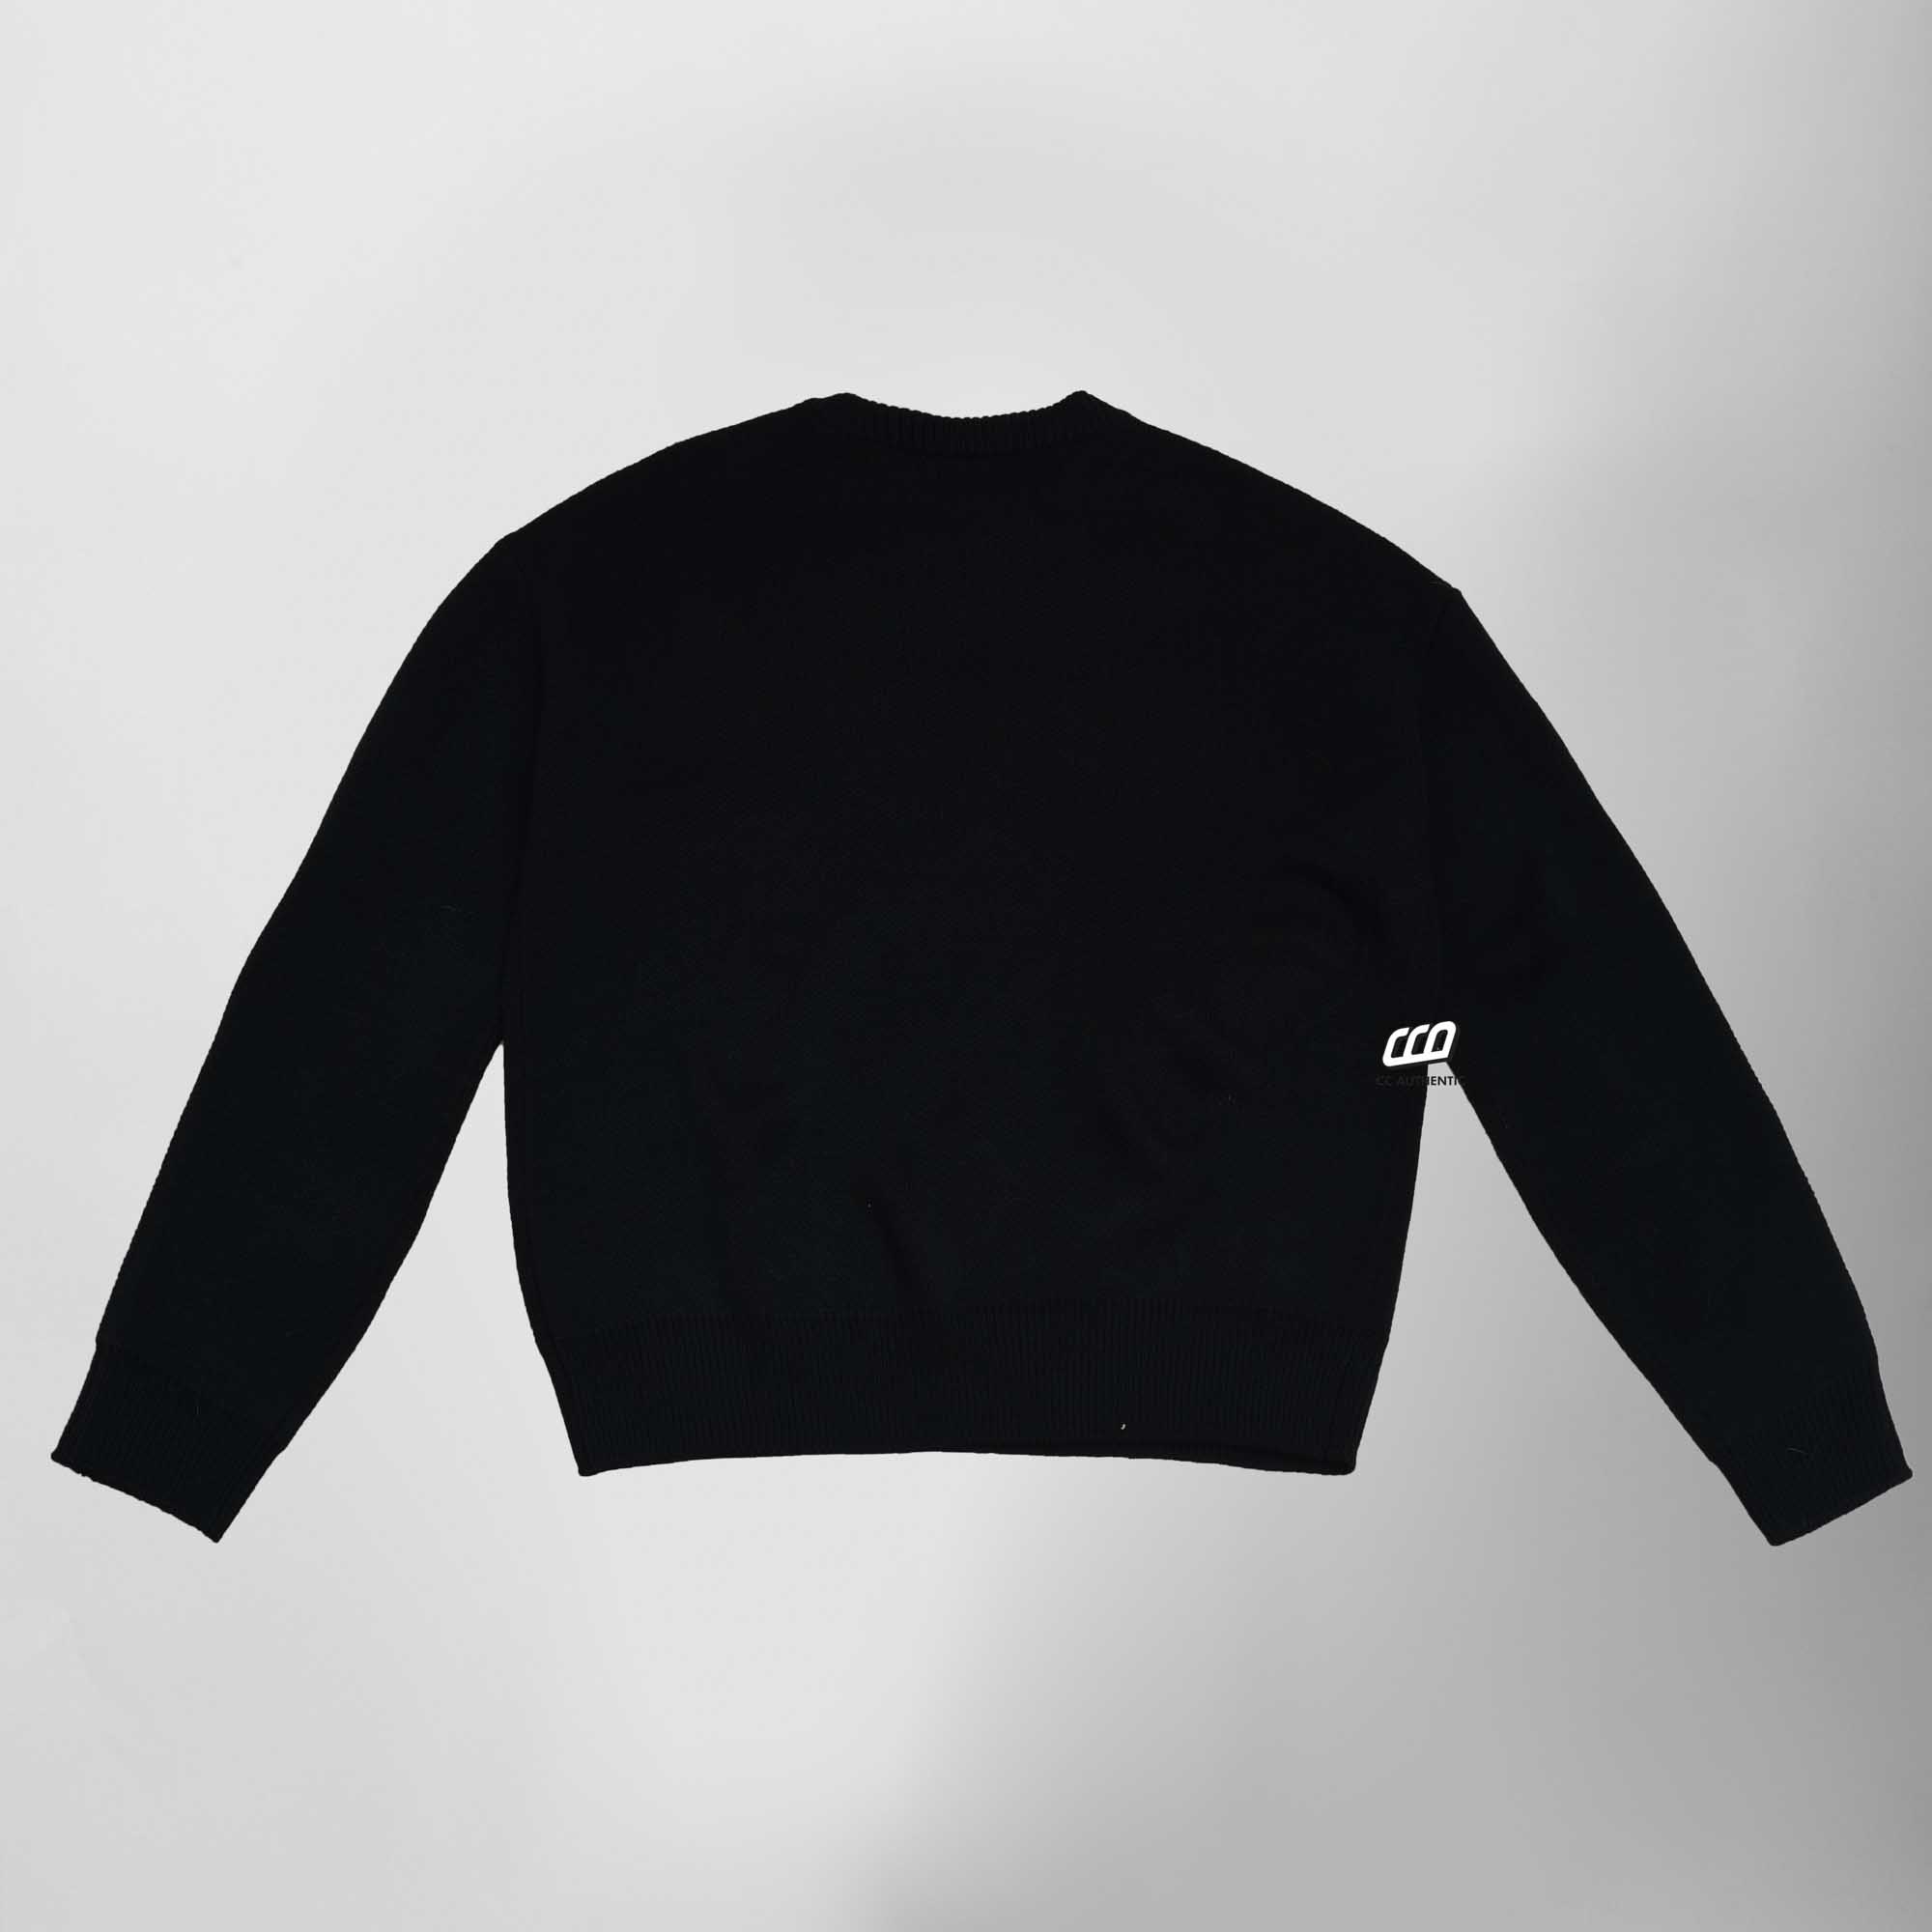 138C GALLERY KNIT SWEATER - BLACK/RED